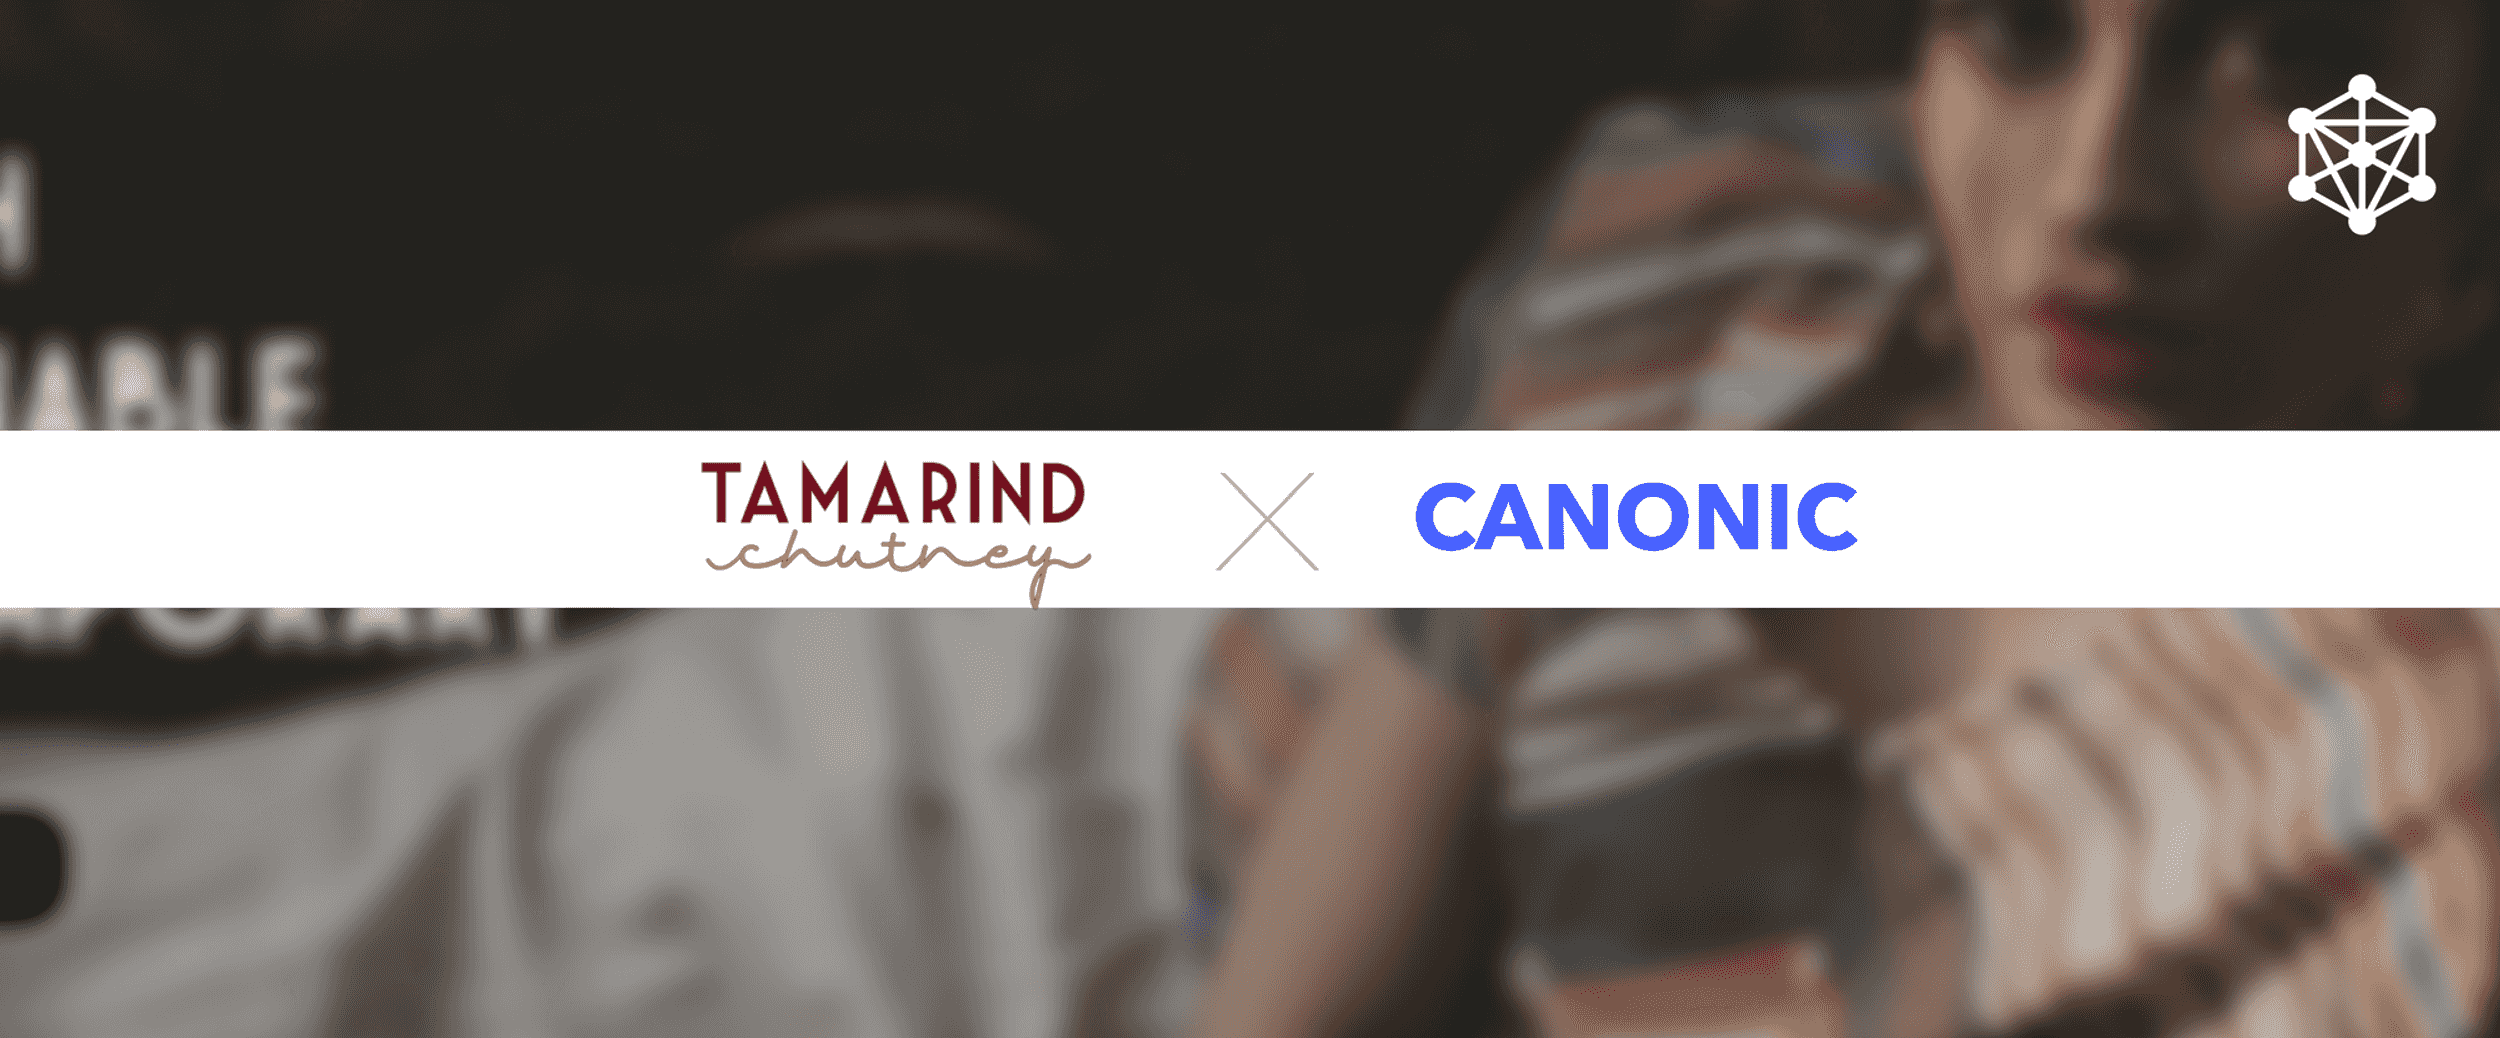 Tamarind Chutney saves 72 hours every month using Canonic to automate Shopify.-image